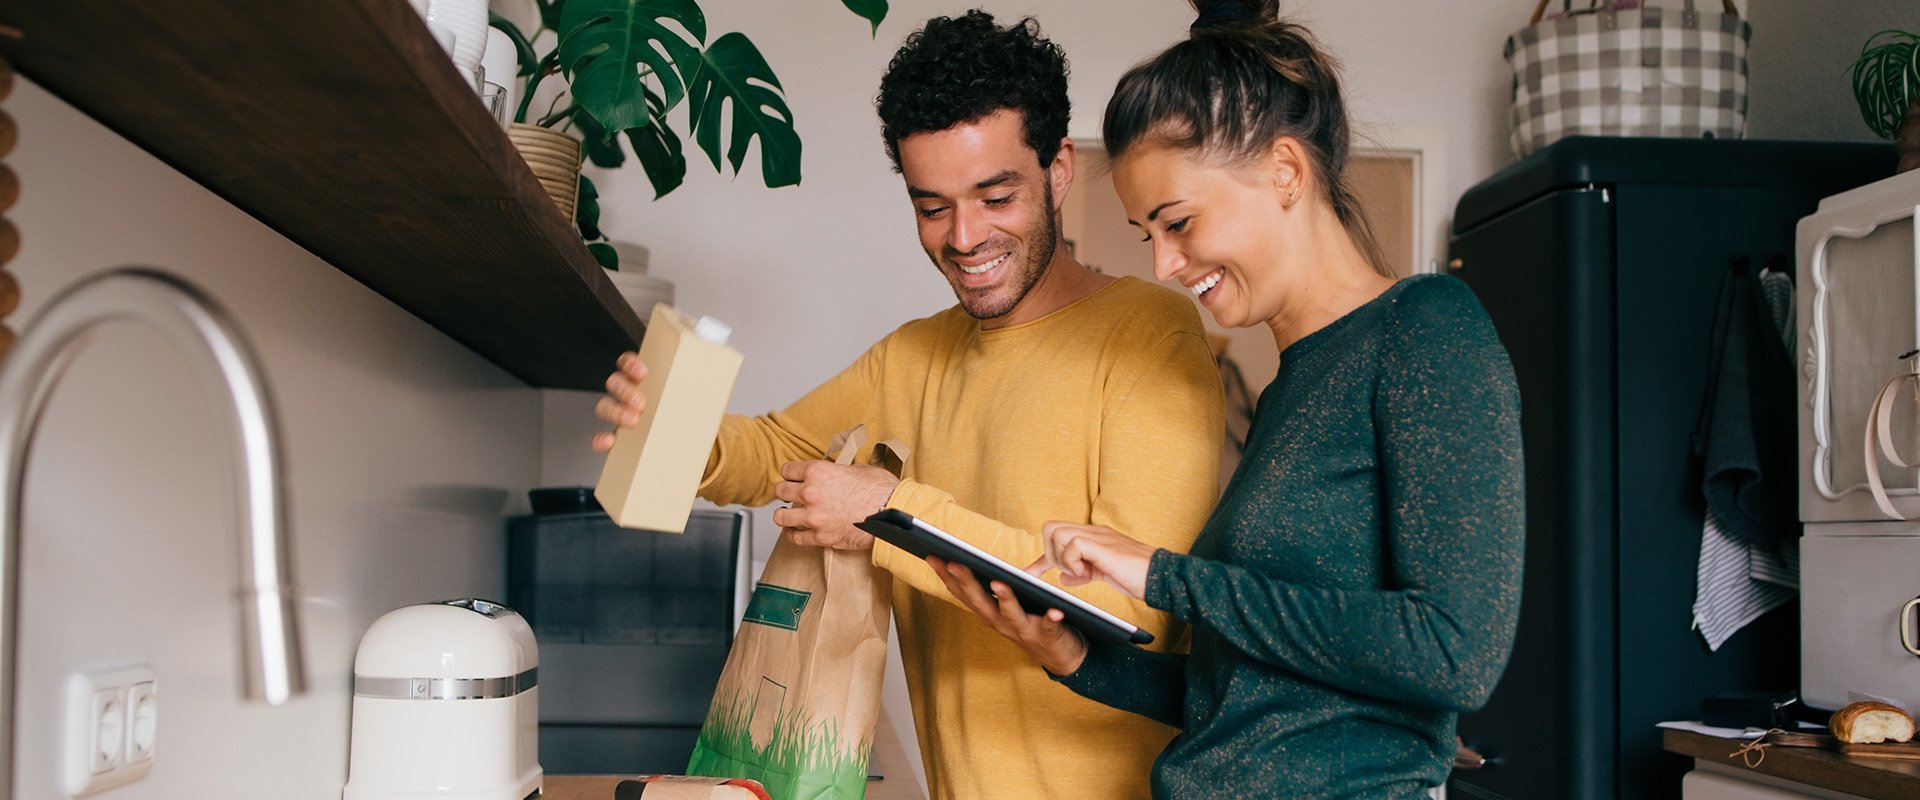 A man and a woman are standing in the kitchen unpacking gorcerie bags. The woman is searching for something on her iPad. They are laughing together and it seems like they are about to cook together.